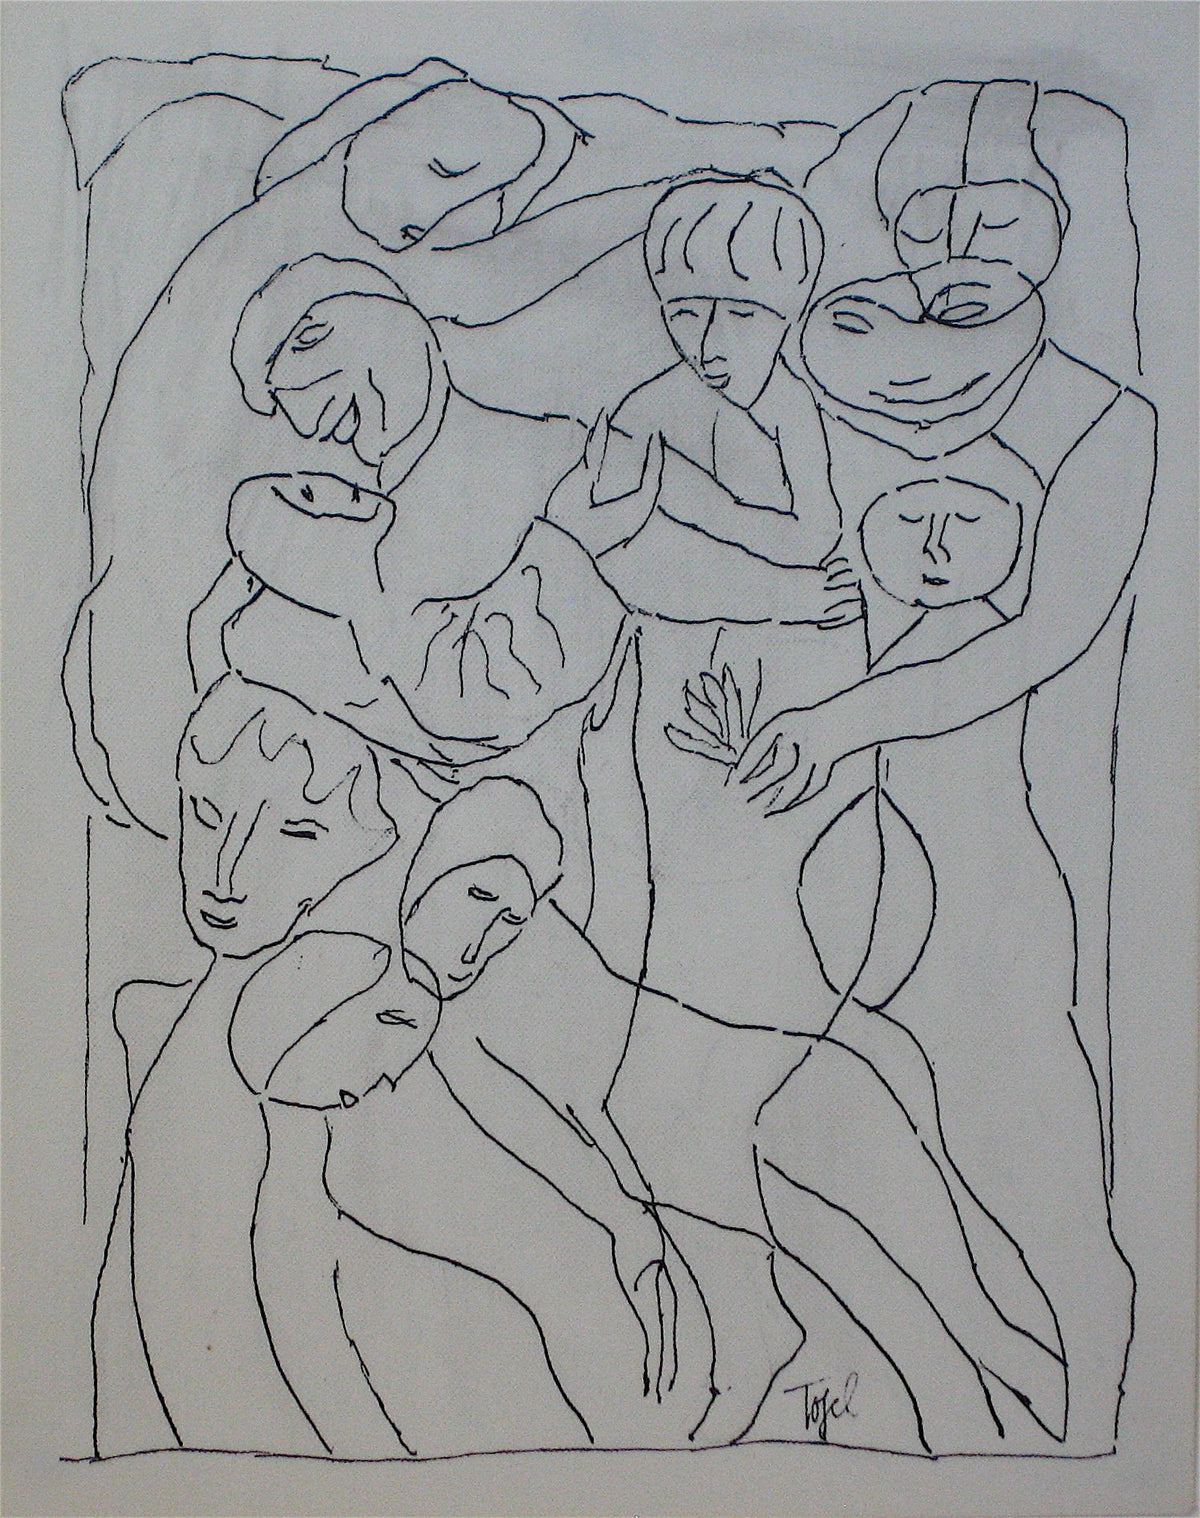 Abstracted Figures in a Scene&lt;br&gt;Early 20th Century Ink&lt;br&gt;&lt;br&gt;#11254